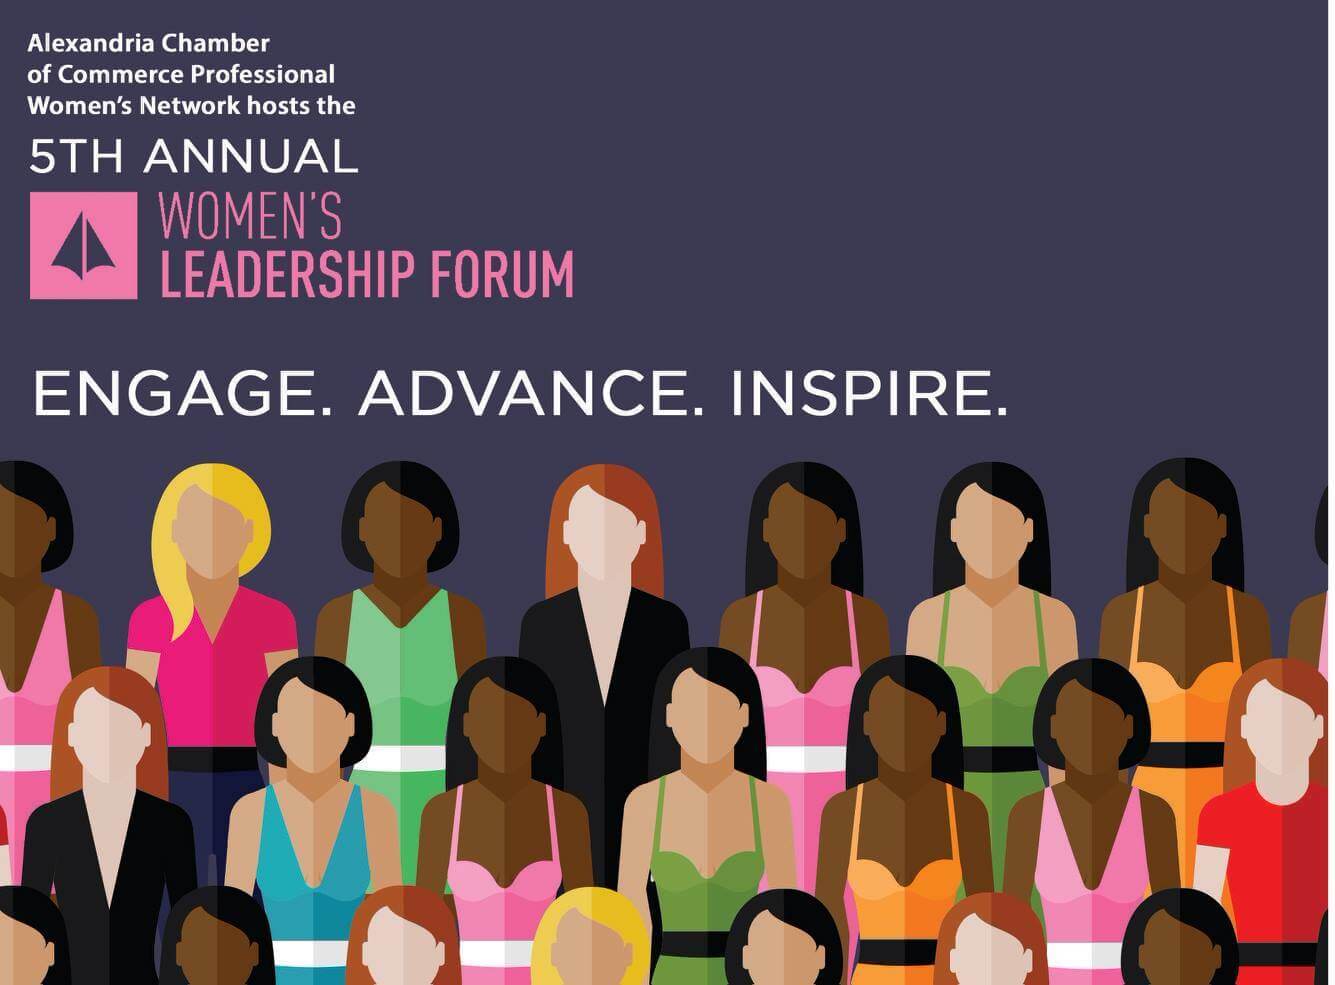 Alexandria Chamber of Commerce Professional Women's Network hosts the 5th annual women's leadership forum Engage. Advance. Inspire above a graphic of several illustrated women